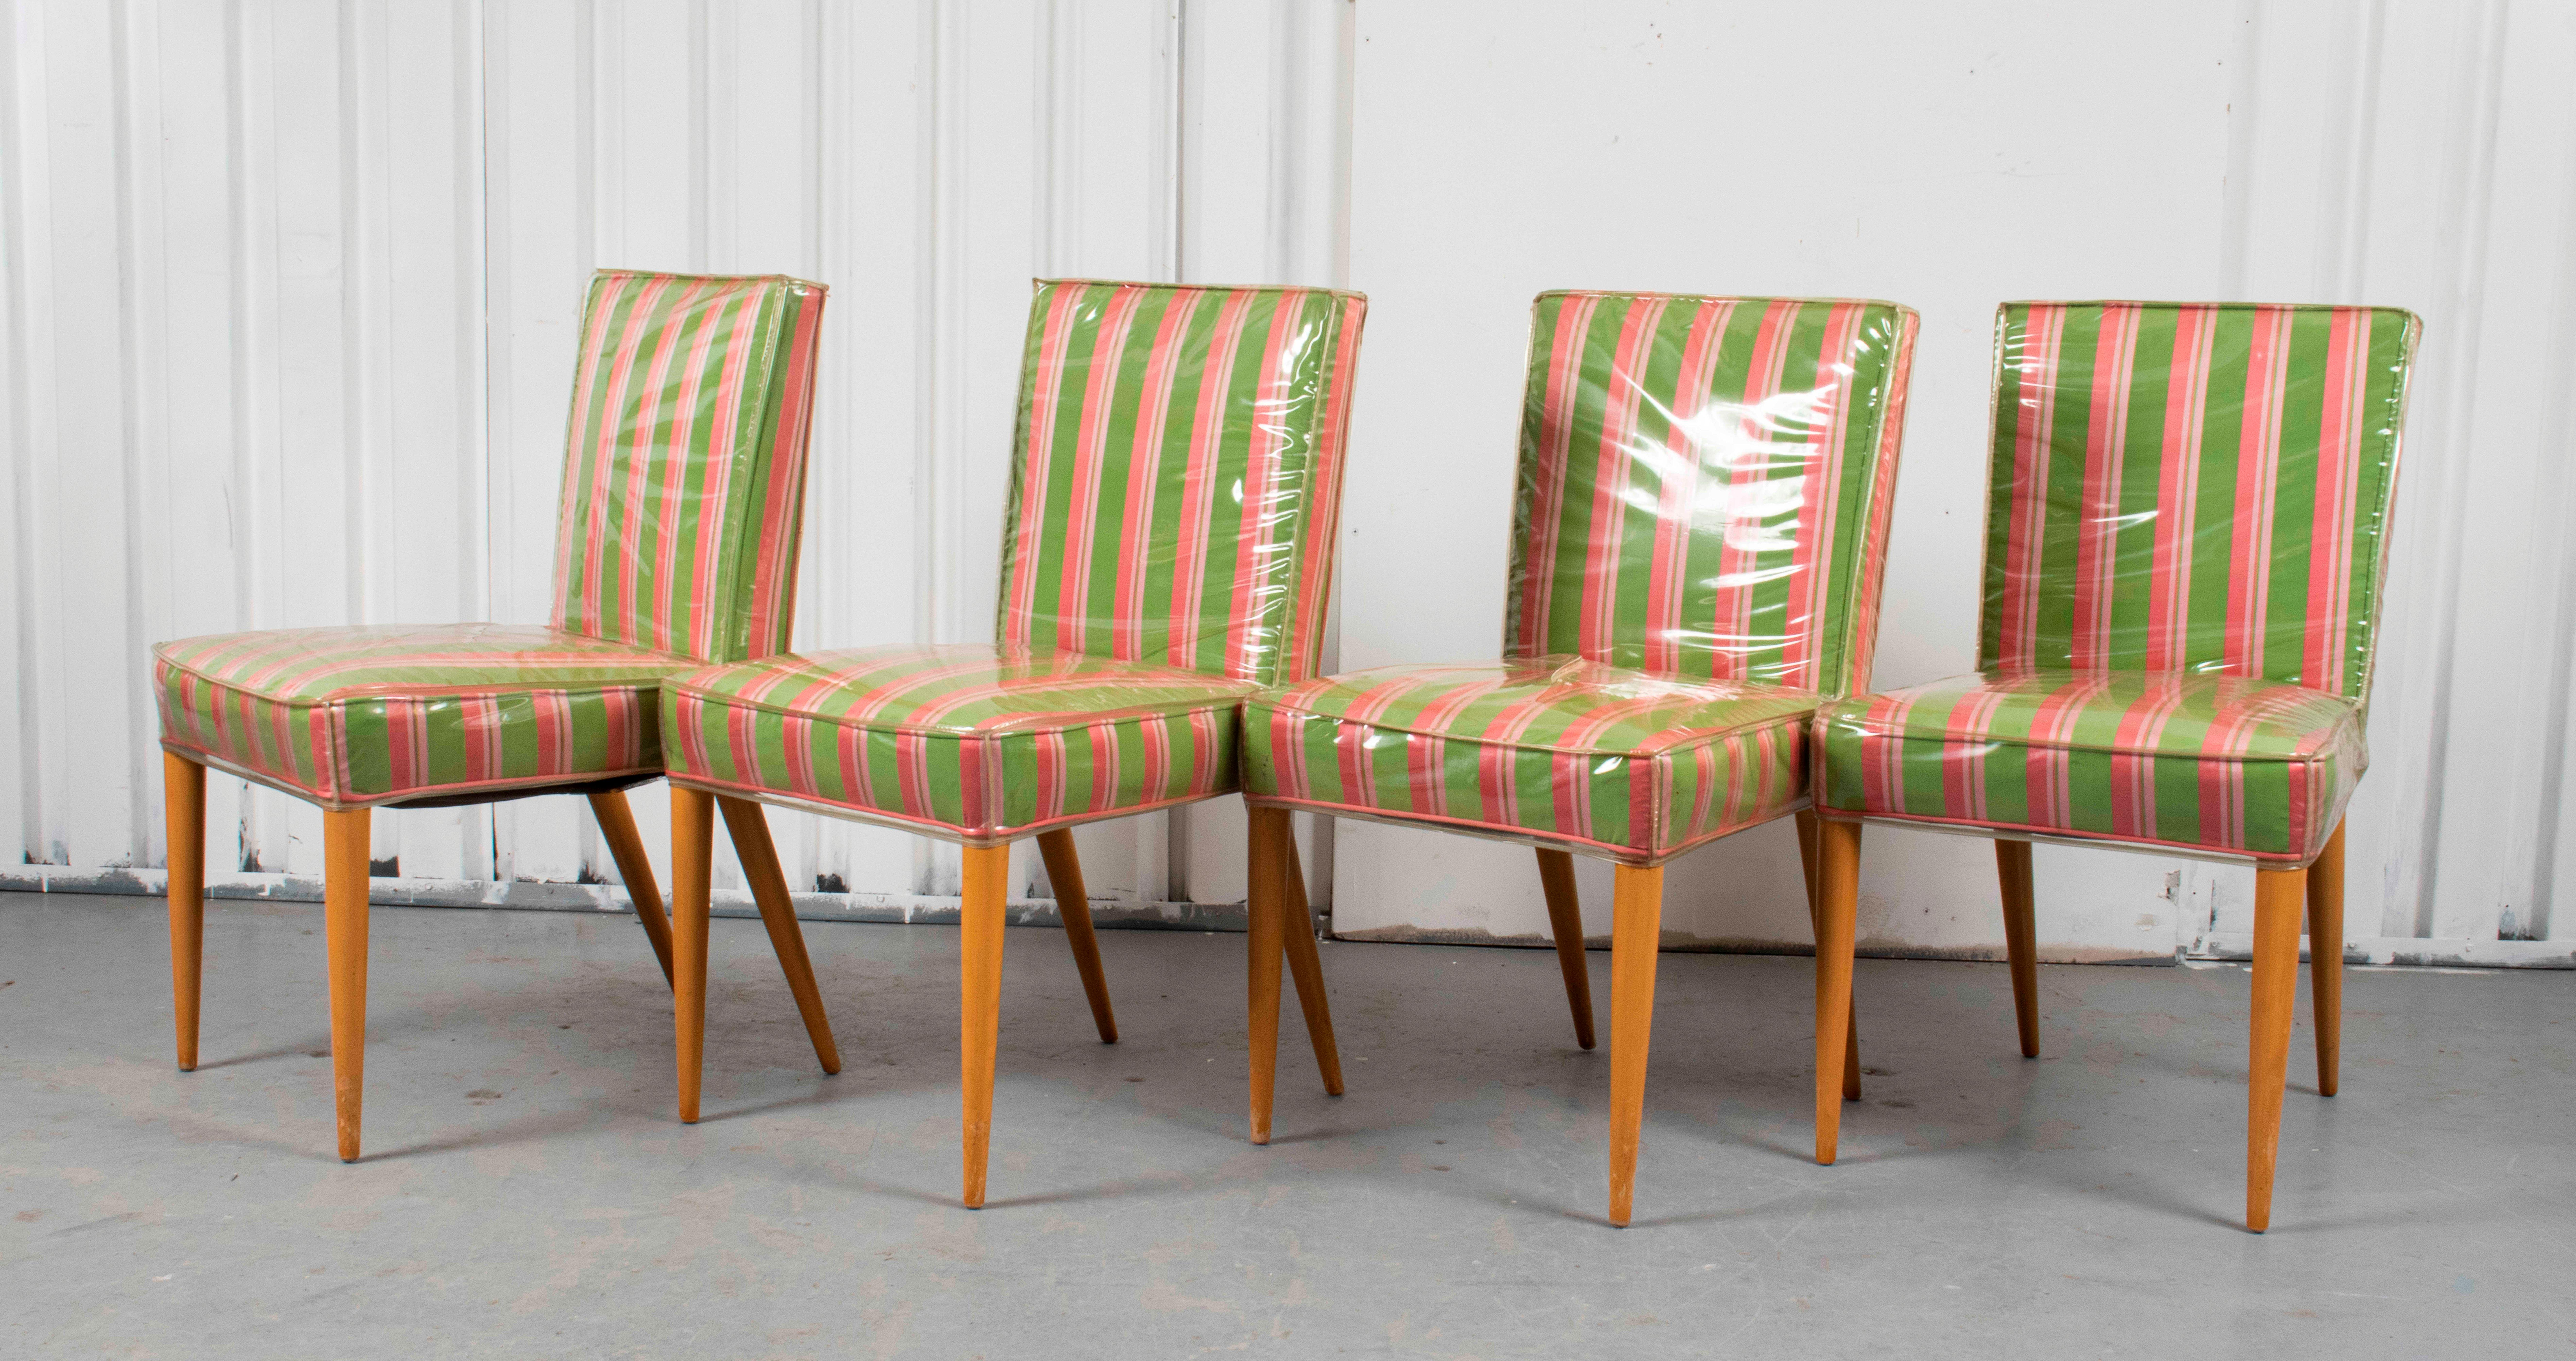 Set of four T.H. Robsjohn-Gibbings for Widdicomb Mid-Century Modern maple dining chairs, upholstered with green fabric with pink stripes. Measures: 34.5” H x 19.5” W x 22.5” D.